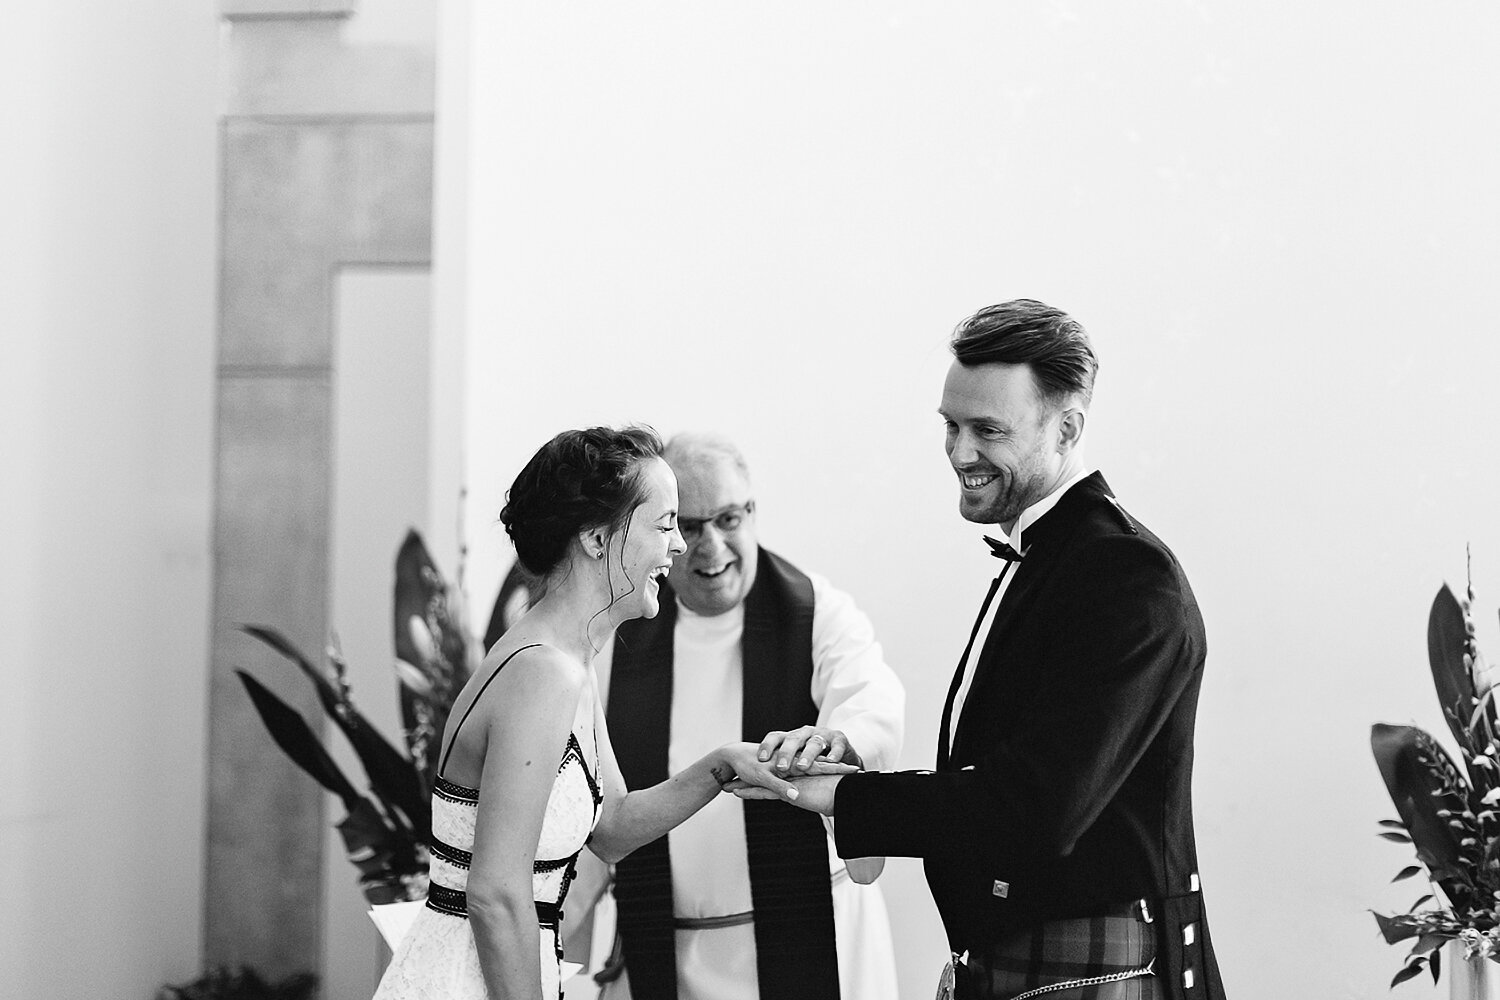 toronto-city-hall-elopement-wedding-old-city-hall-nathan-phillips-square-toronto-wedding-photographer-ryanne-hollies-photography-ceremony-city-hall-emotional-candid-moments-how-to-do-a-city-hall-wedding-toronto-vows-laughing-bride-and-groom.JPG